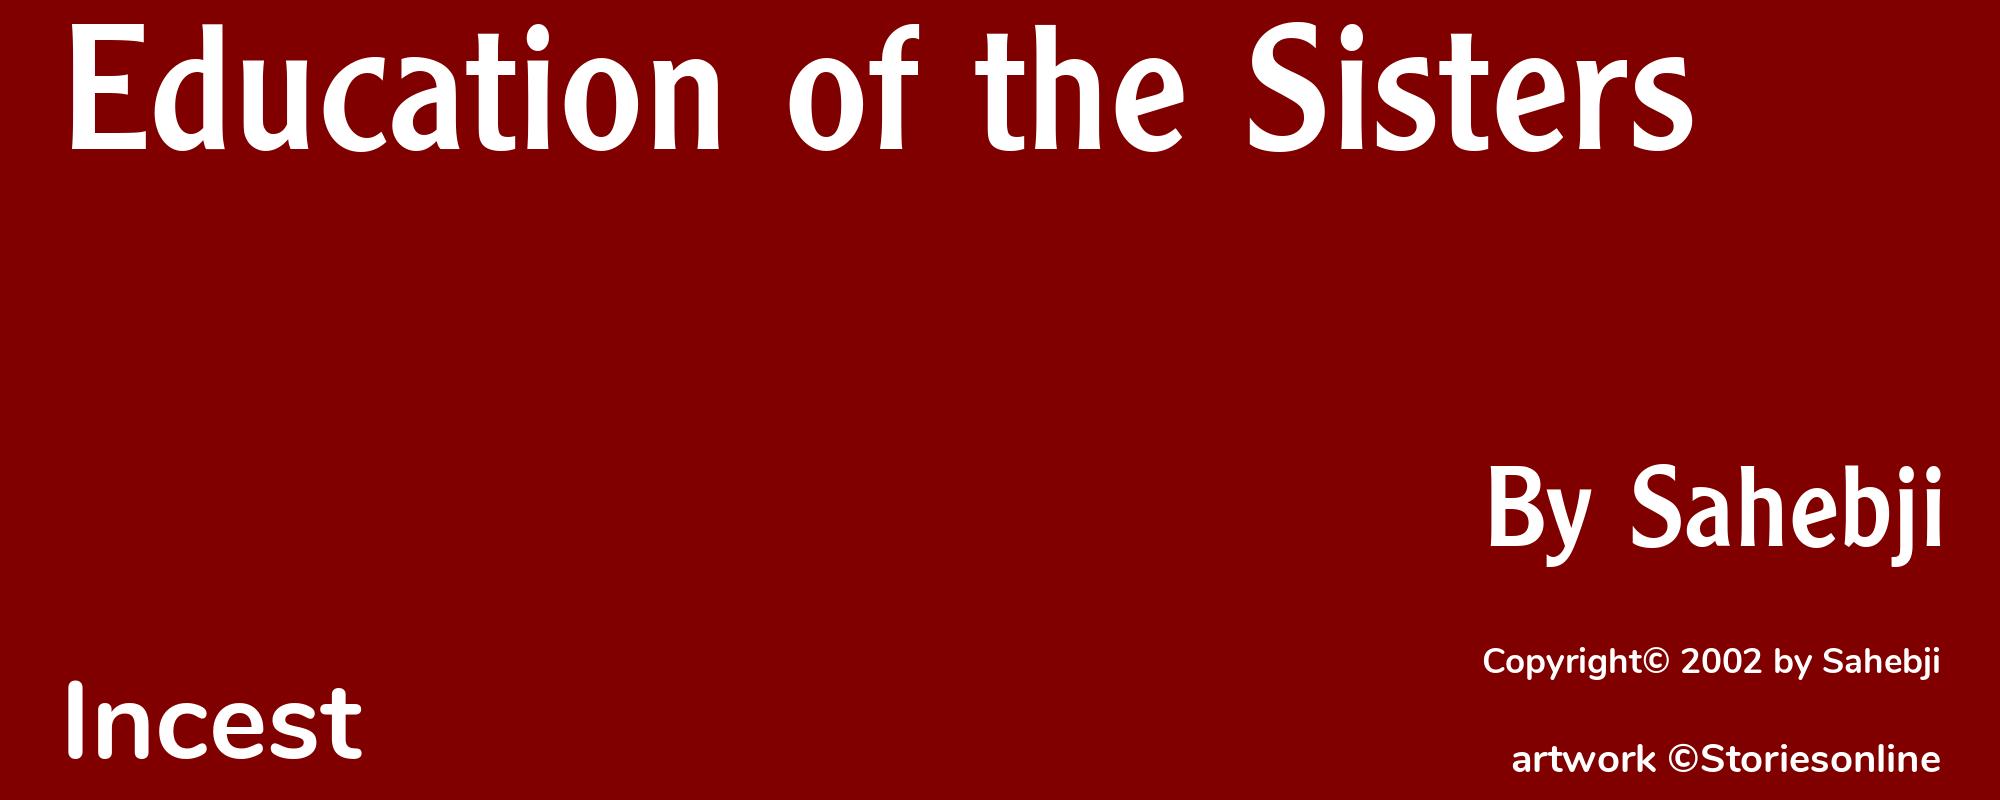 Education of the Sisters - Cover